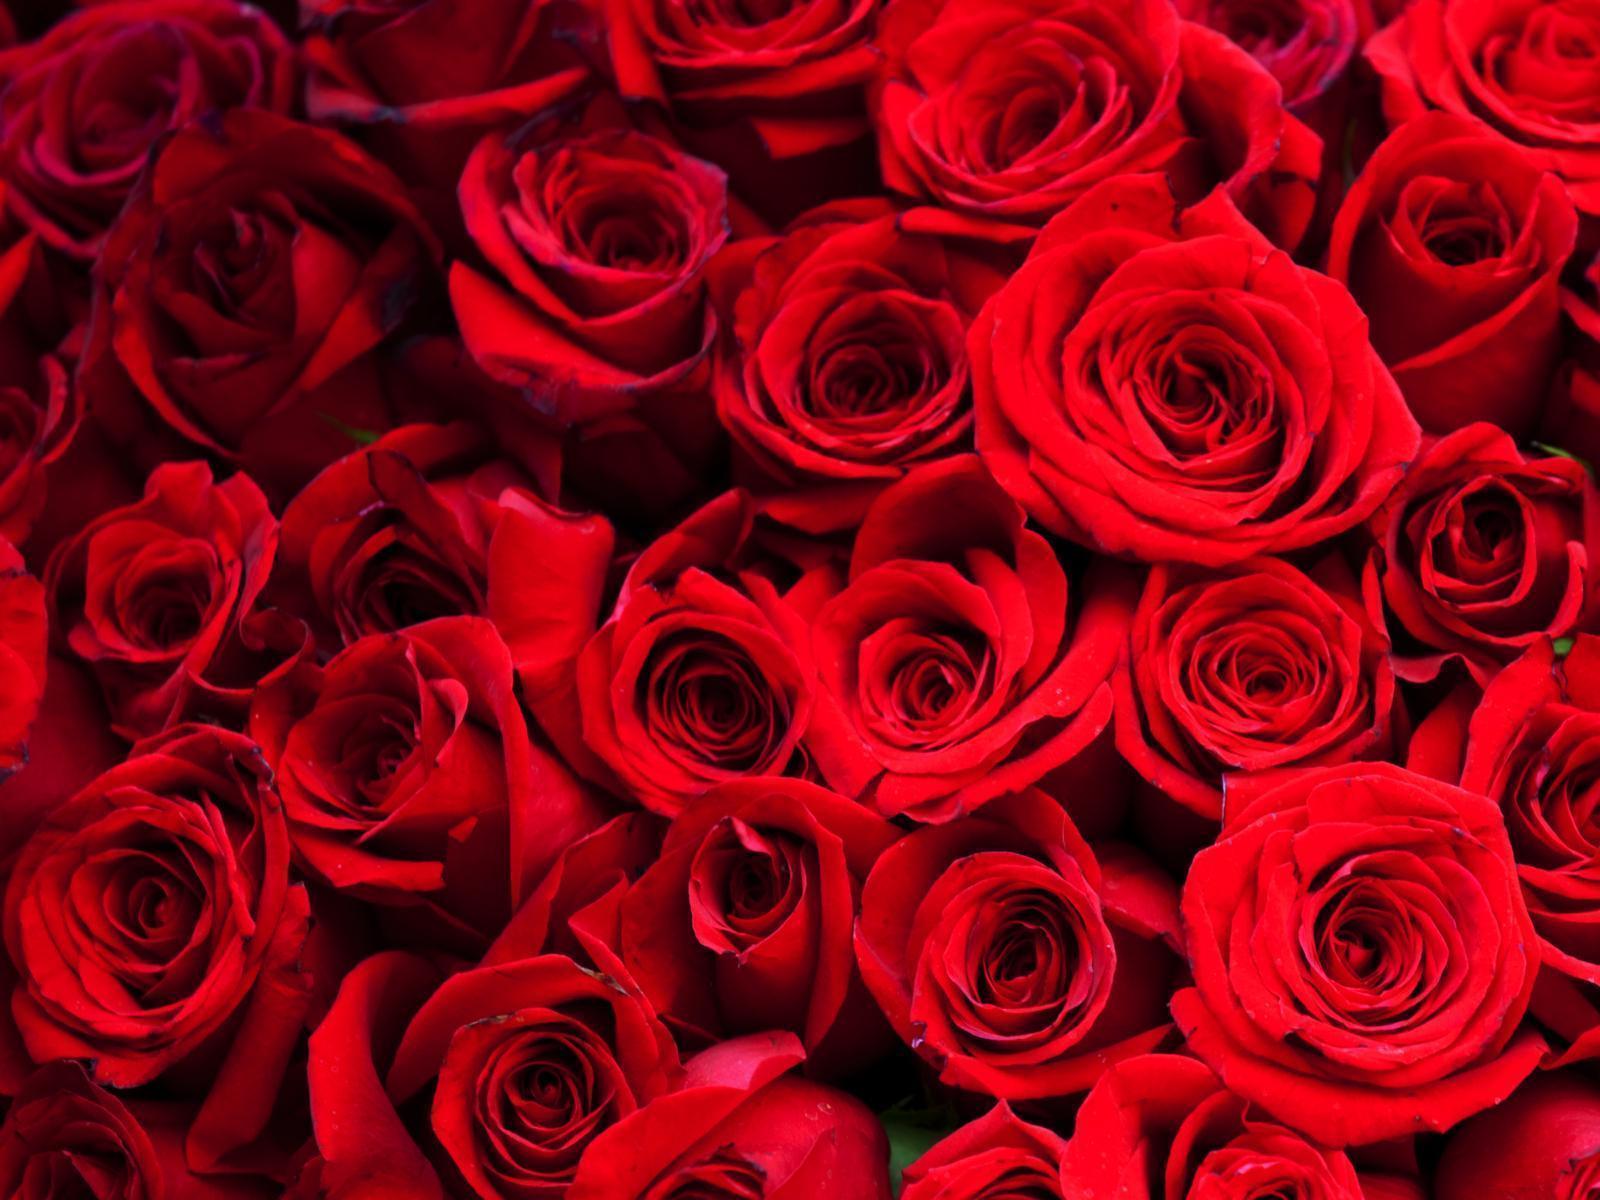 red-roses-quality-backgrounds-for-powerpoint-templates-ppt-backgrounds